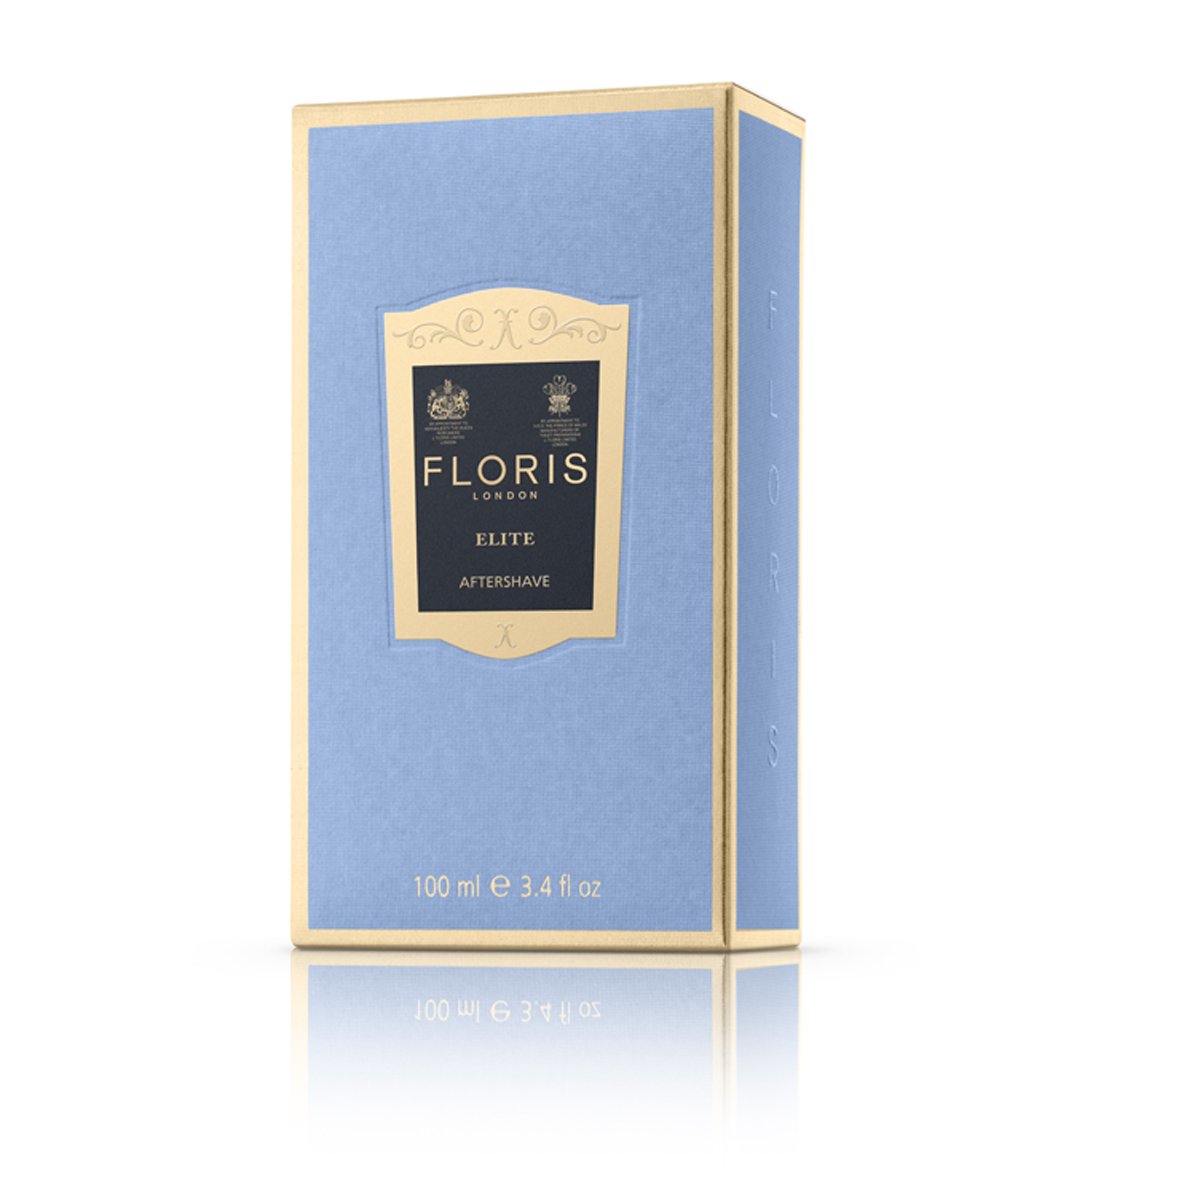 Blue and gold box with elite aftershave logo